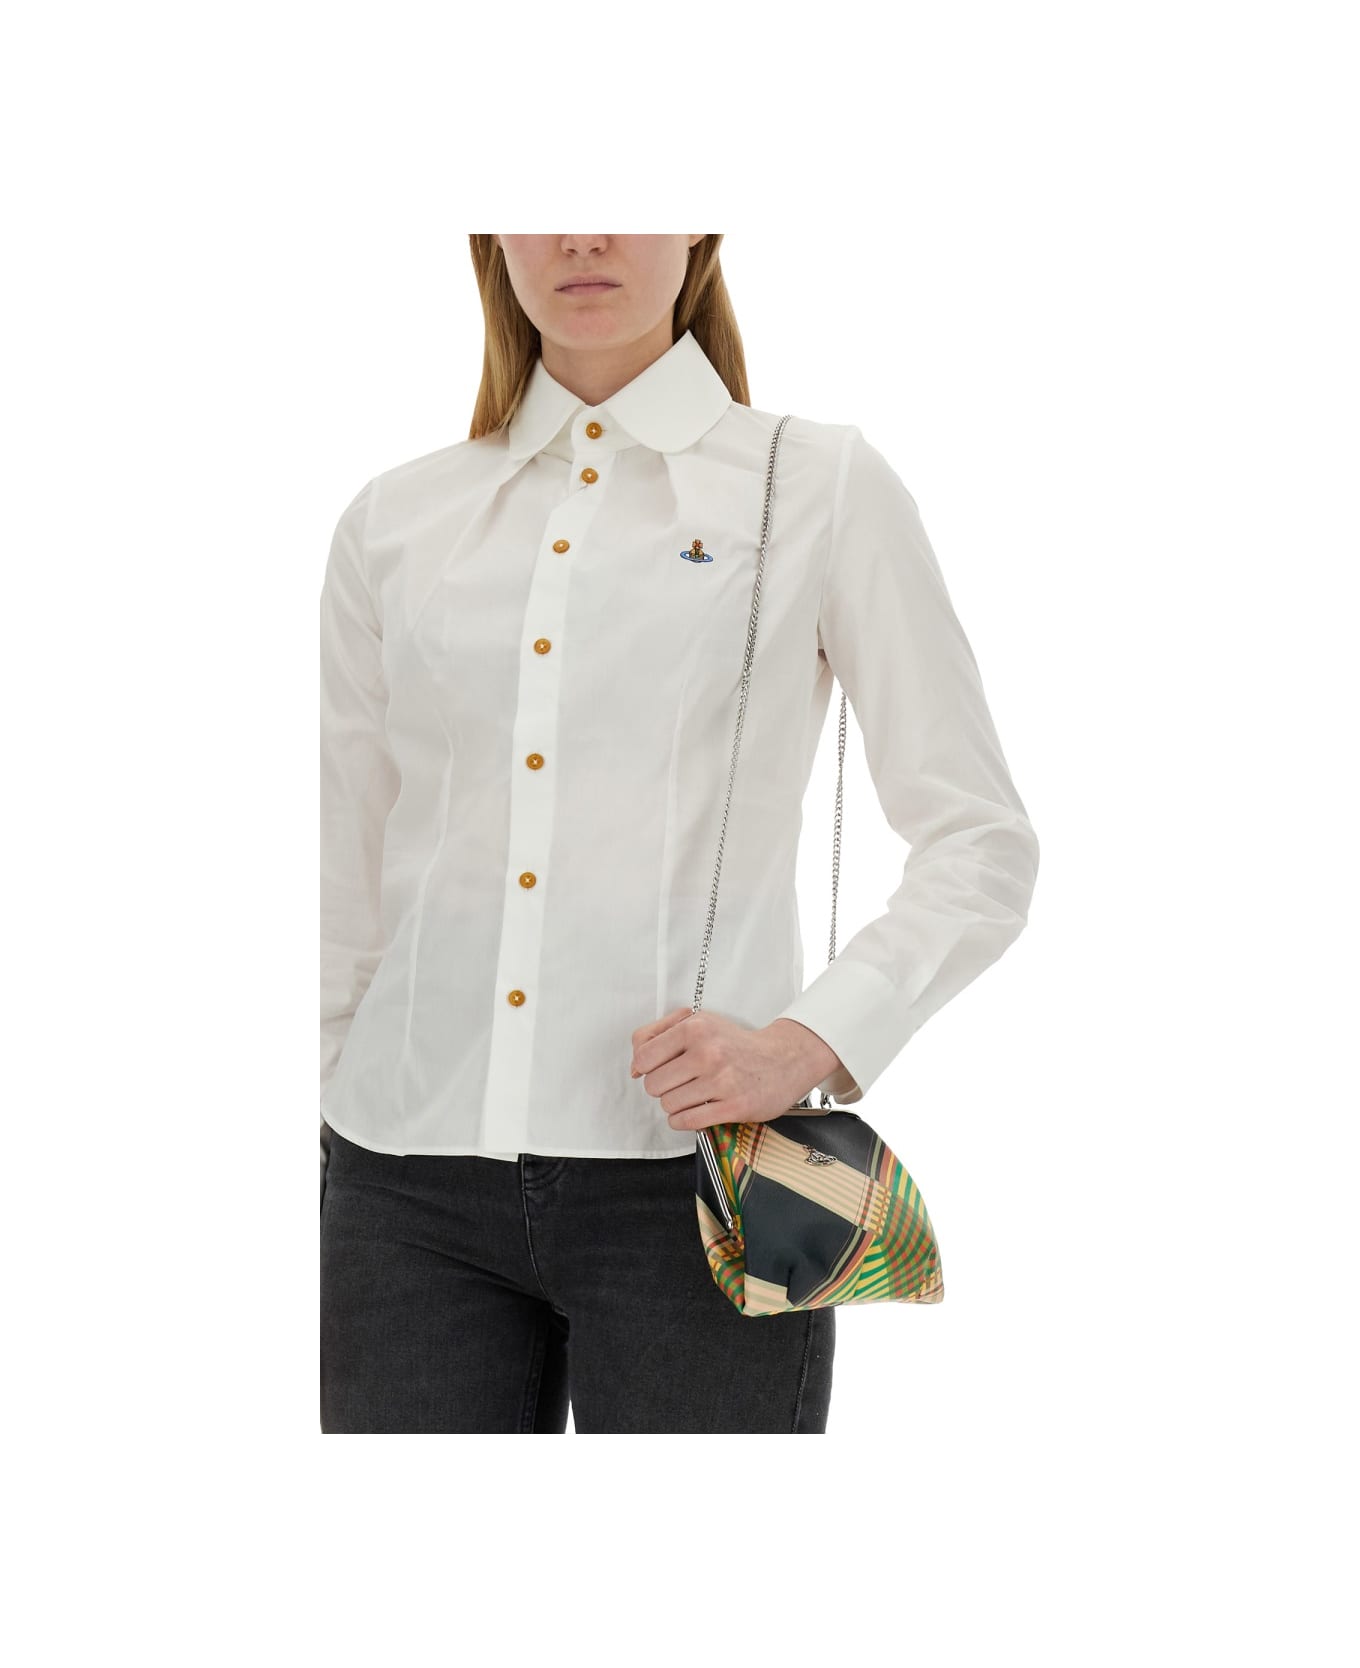 Vivienne Westwood Shirt With Orb Embroidery - WHITE